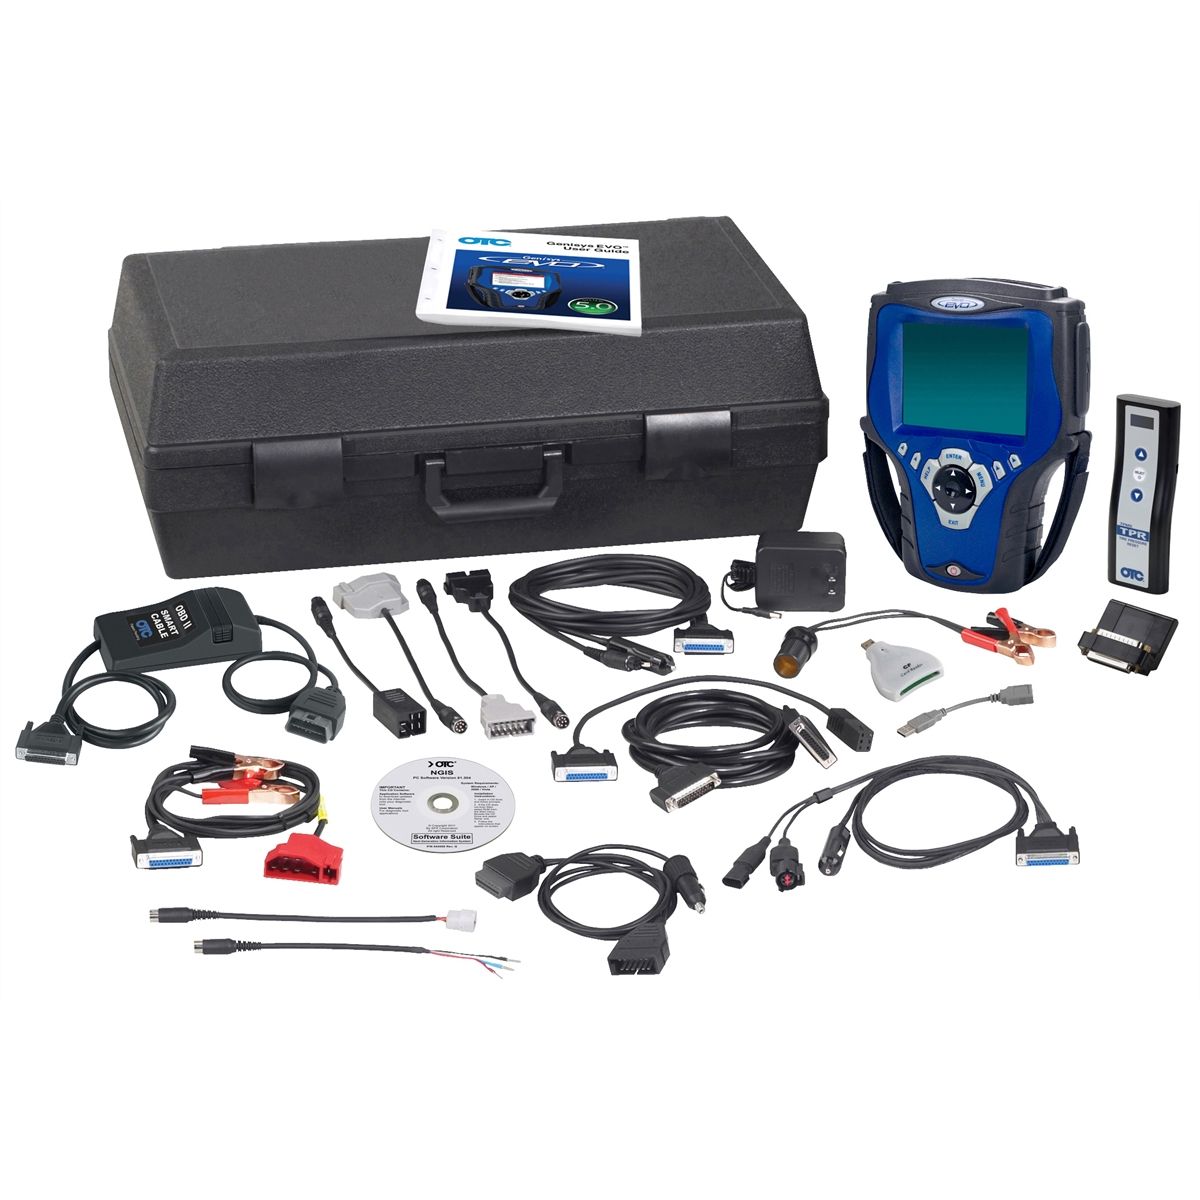 Genisys EVO Scan Tool, USA 2011 Deluxe Kit with TPMS